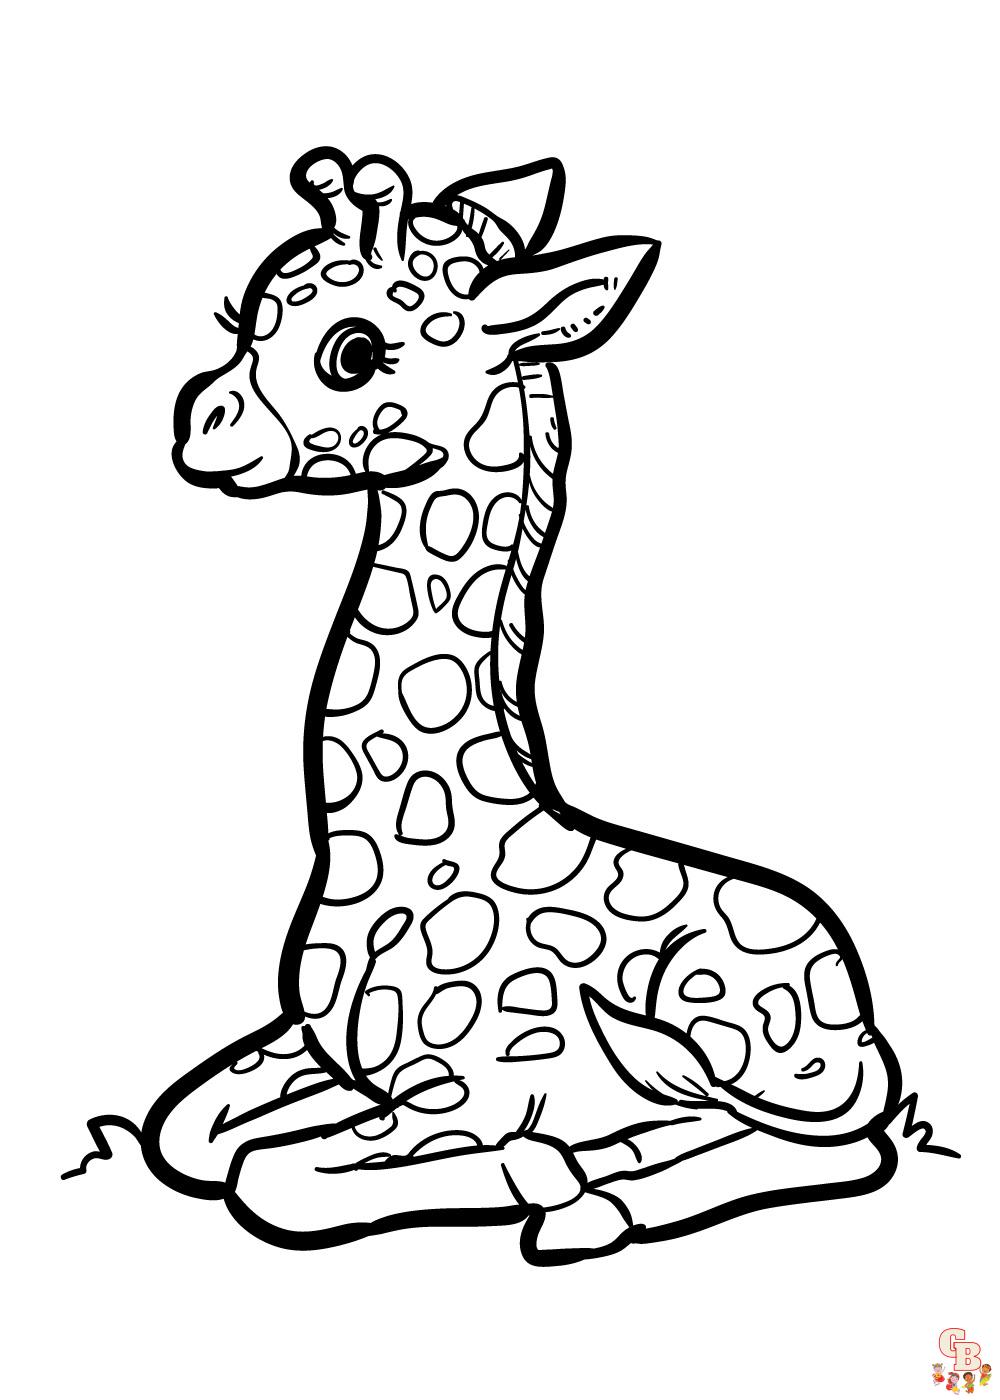 Cute giraffe coloring pages